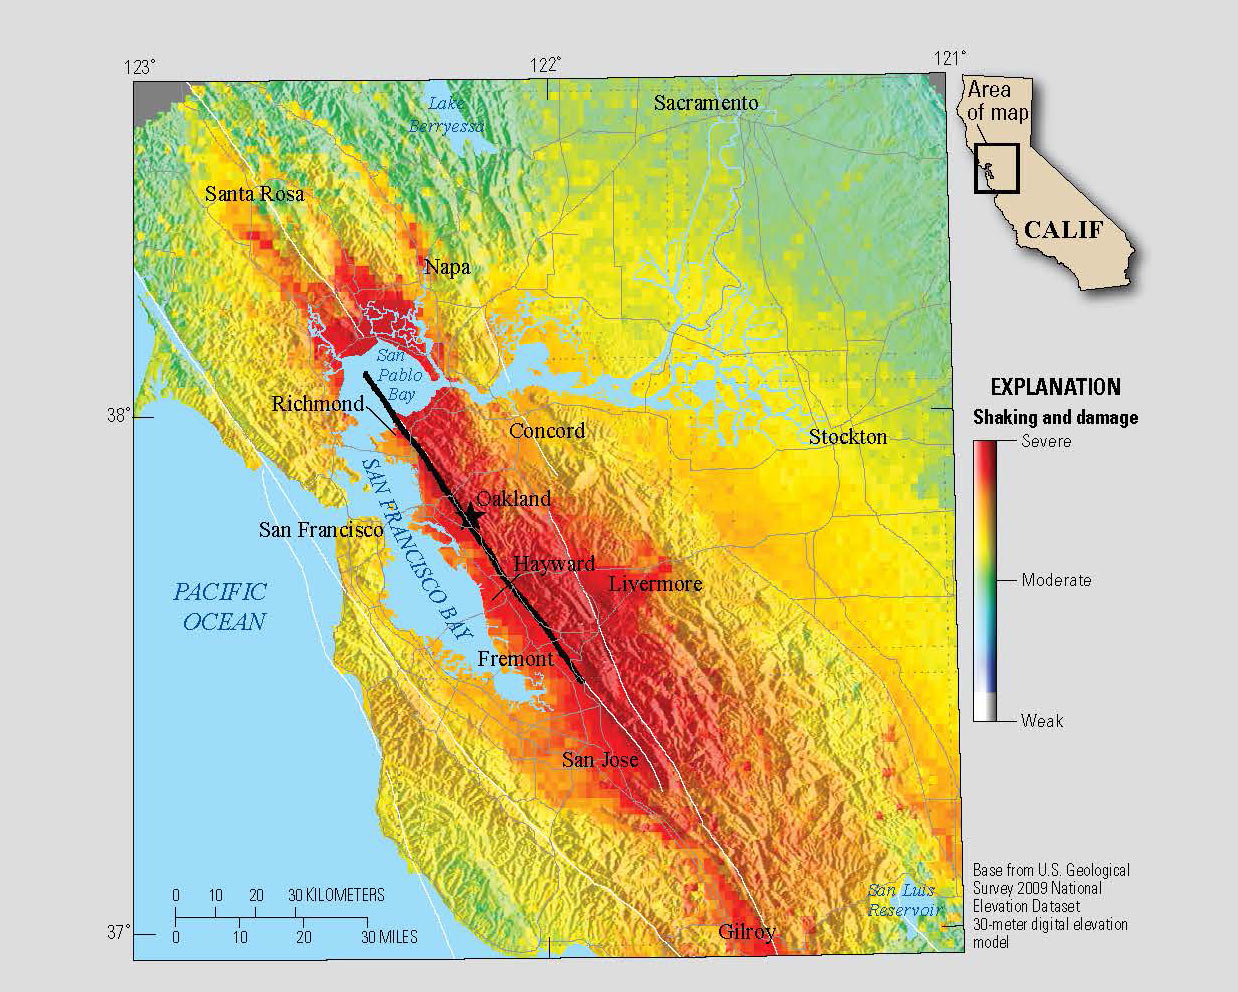 Graph showing expected shaking of hypothetical M7 quake on the Hayward Fault